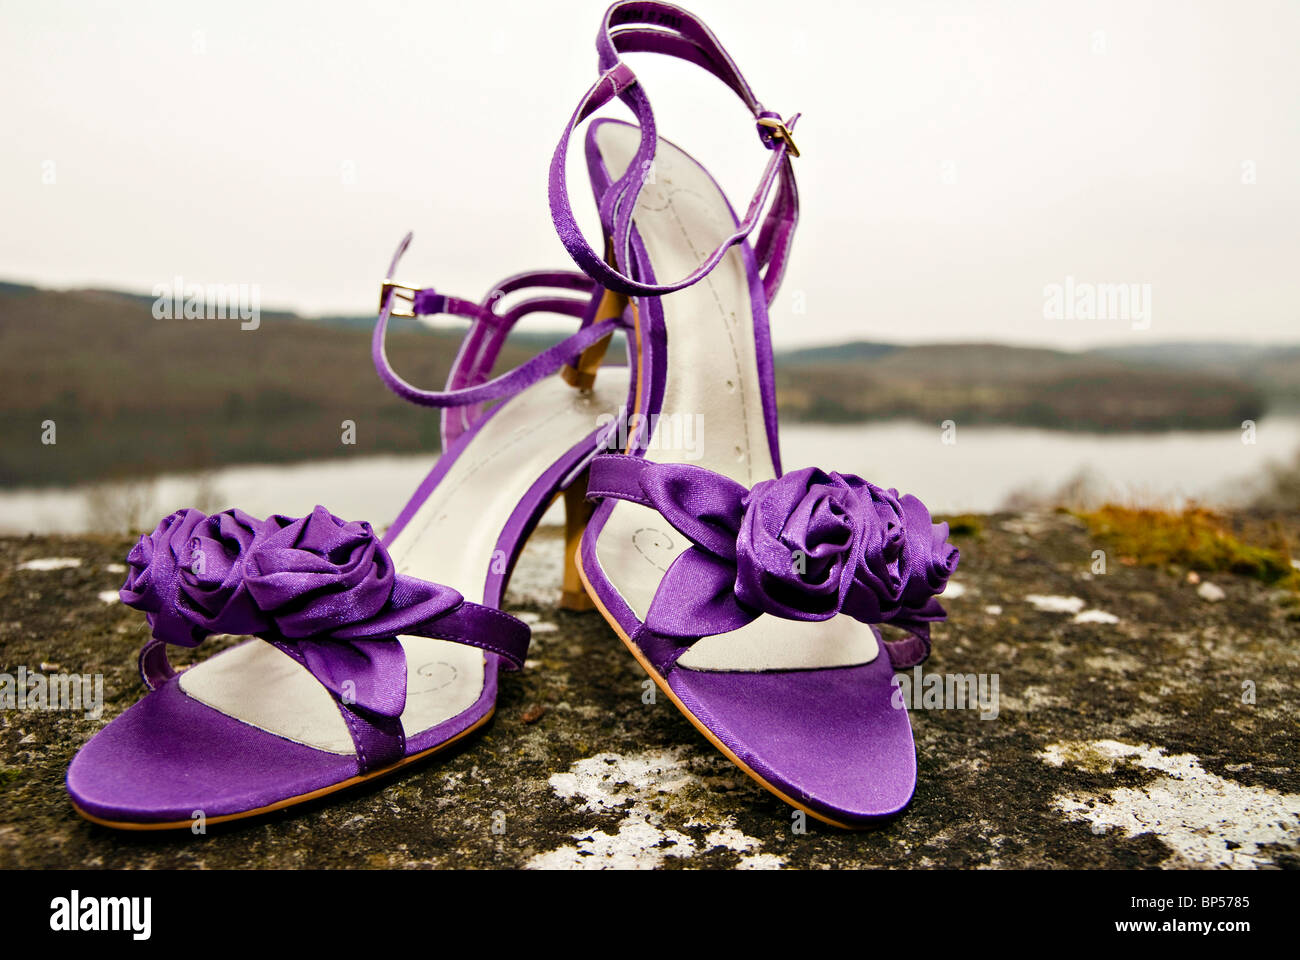 Purple Sandals High Resolution Stock Photography and Images - Alamy